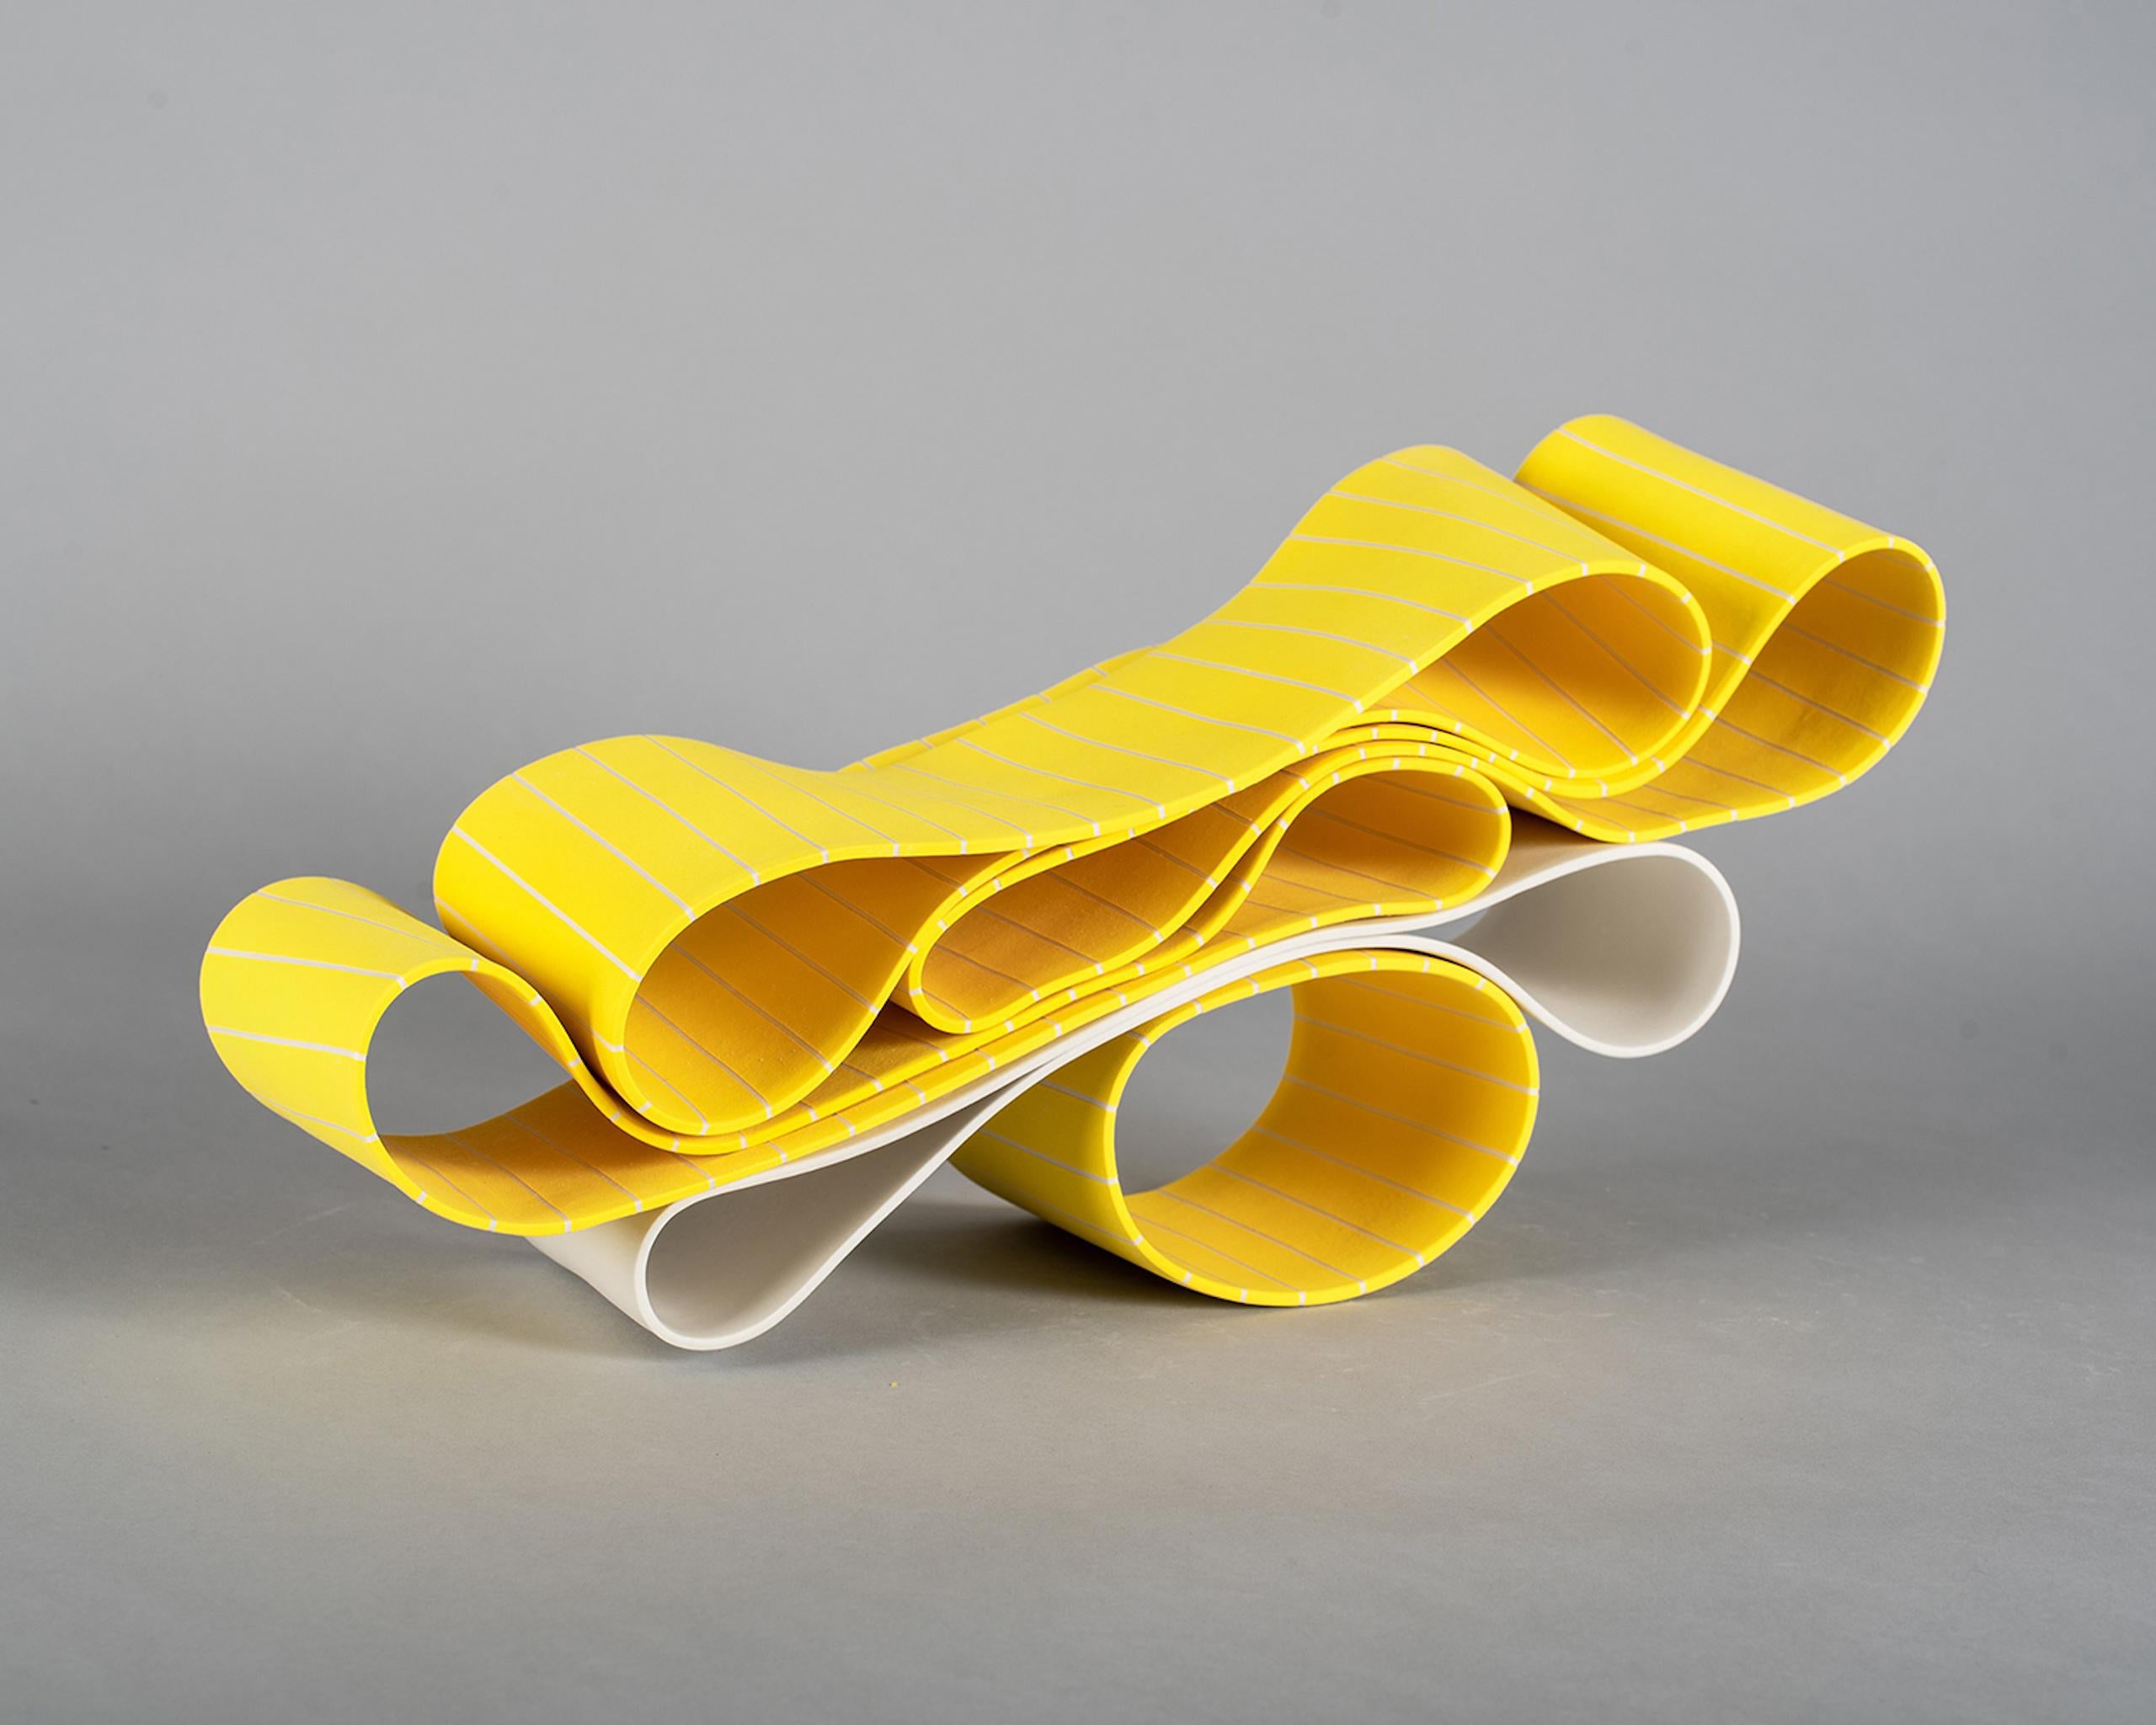 Folding in Motion 9 by Simcha Even-Chen - Porcelain sculpture, yellow lines For Sale 2